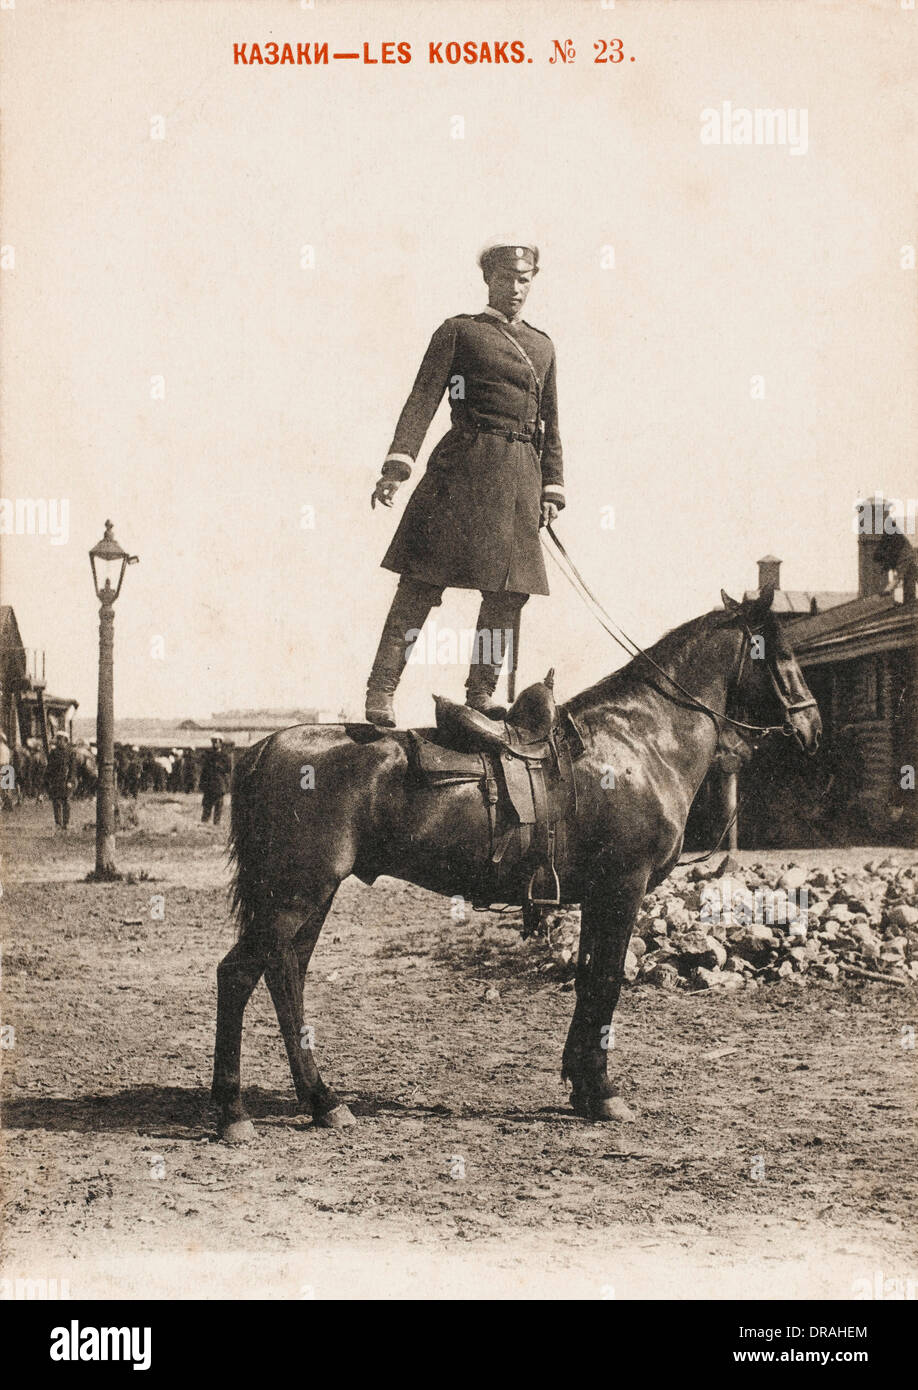 Cossack standing on horse's back Stock Photo